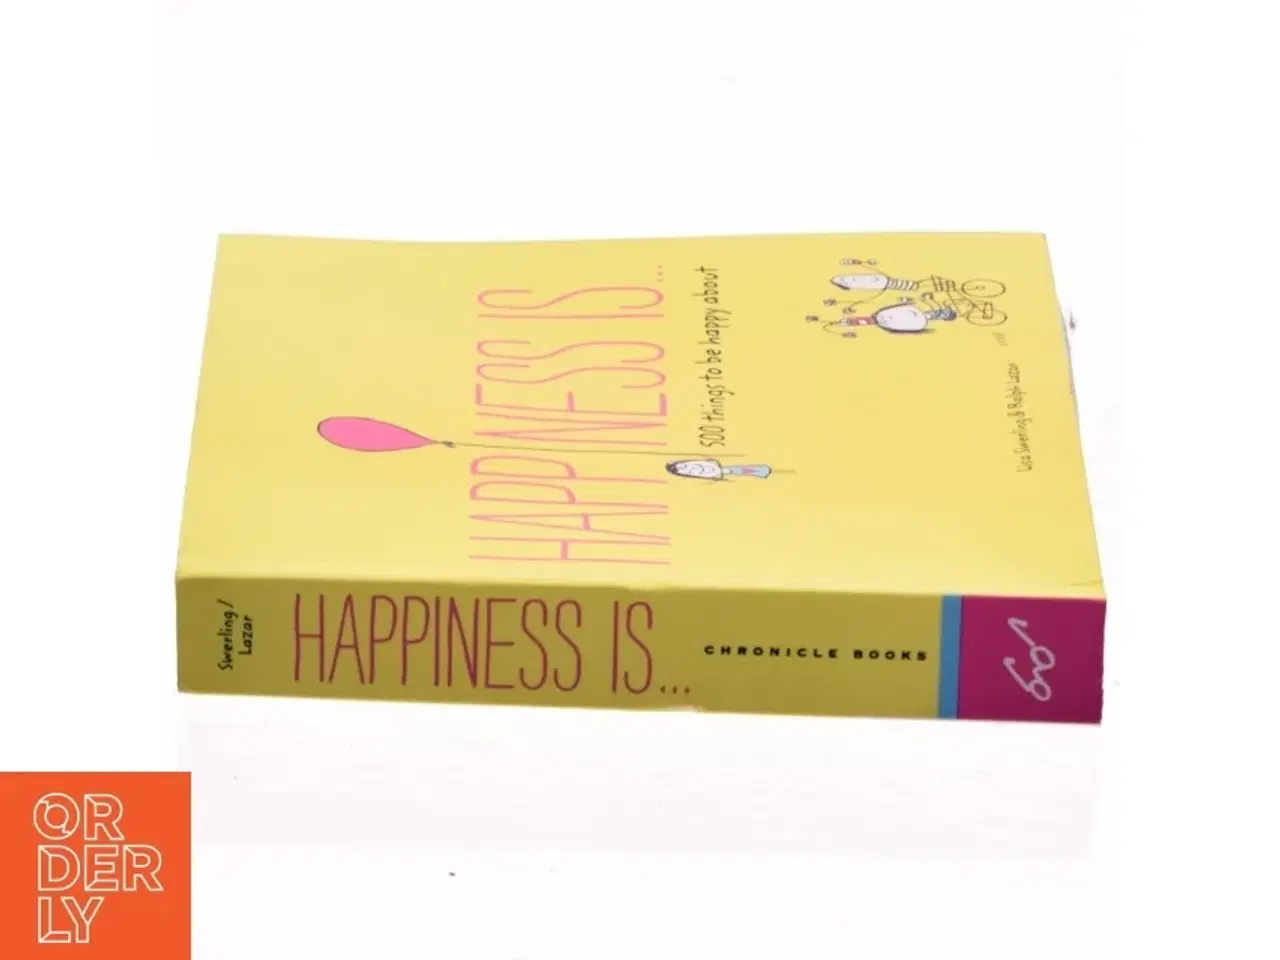 Billede 2 - Happiness is, 500 things to be happy about